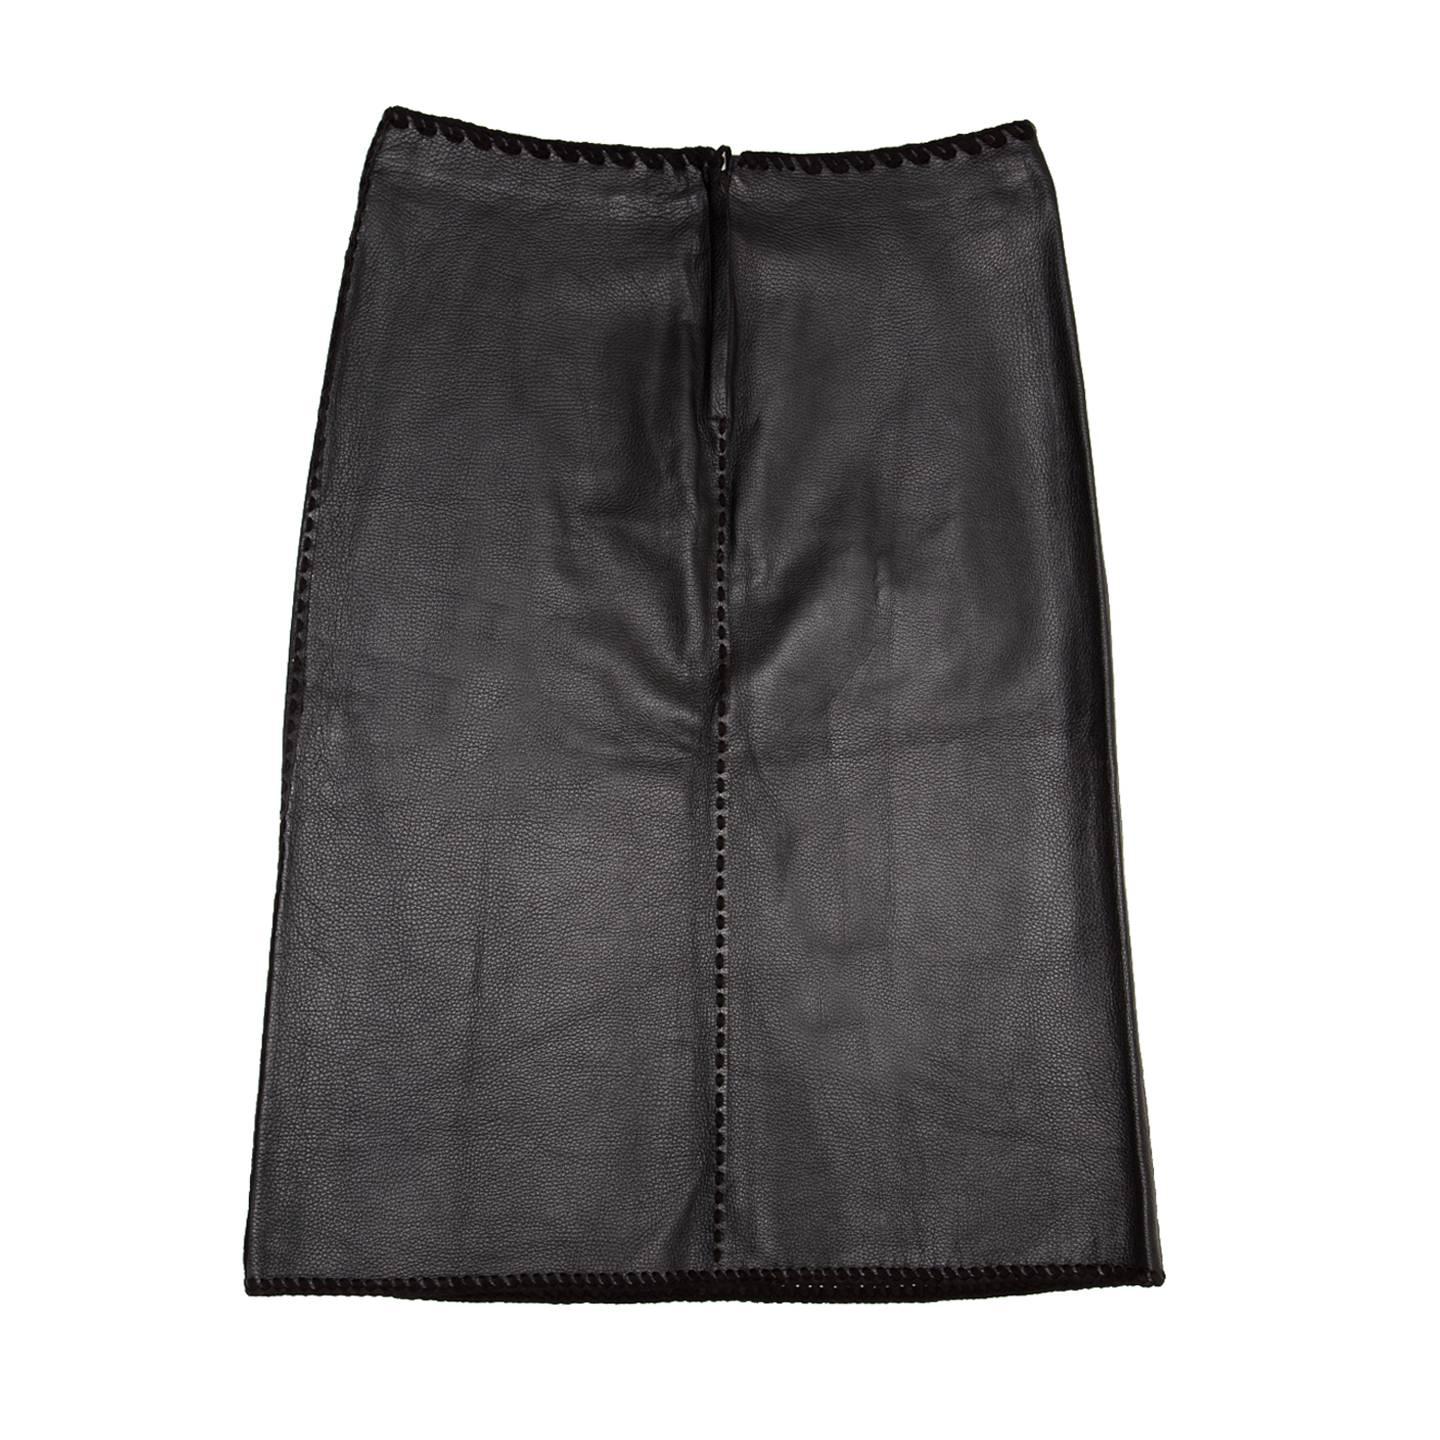 Thick and soft black textured 100% deer skin leather skirt with tone-on-tone suede decorative stitchings on side and central seams, waist and hem. Made in the U.S.A.

Size  10 US sizing
Waist measures 16